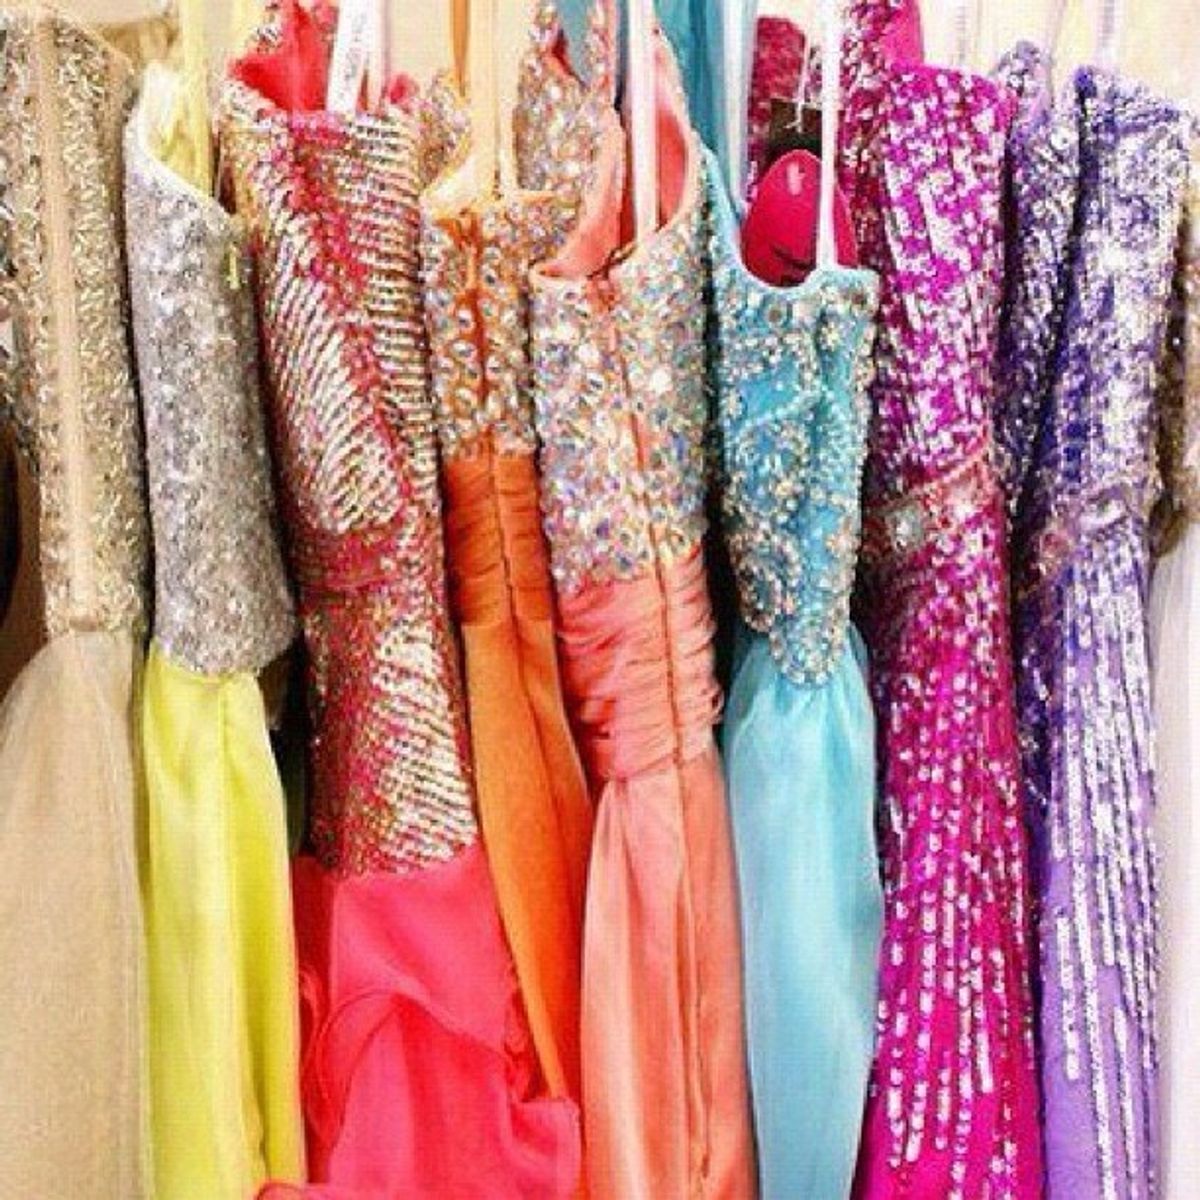 The 'do's and 'don't's of Prom Dress Shopping